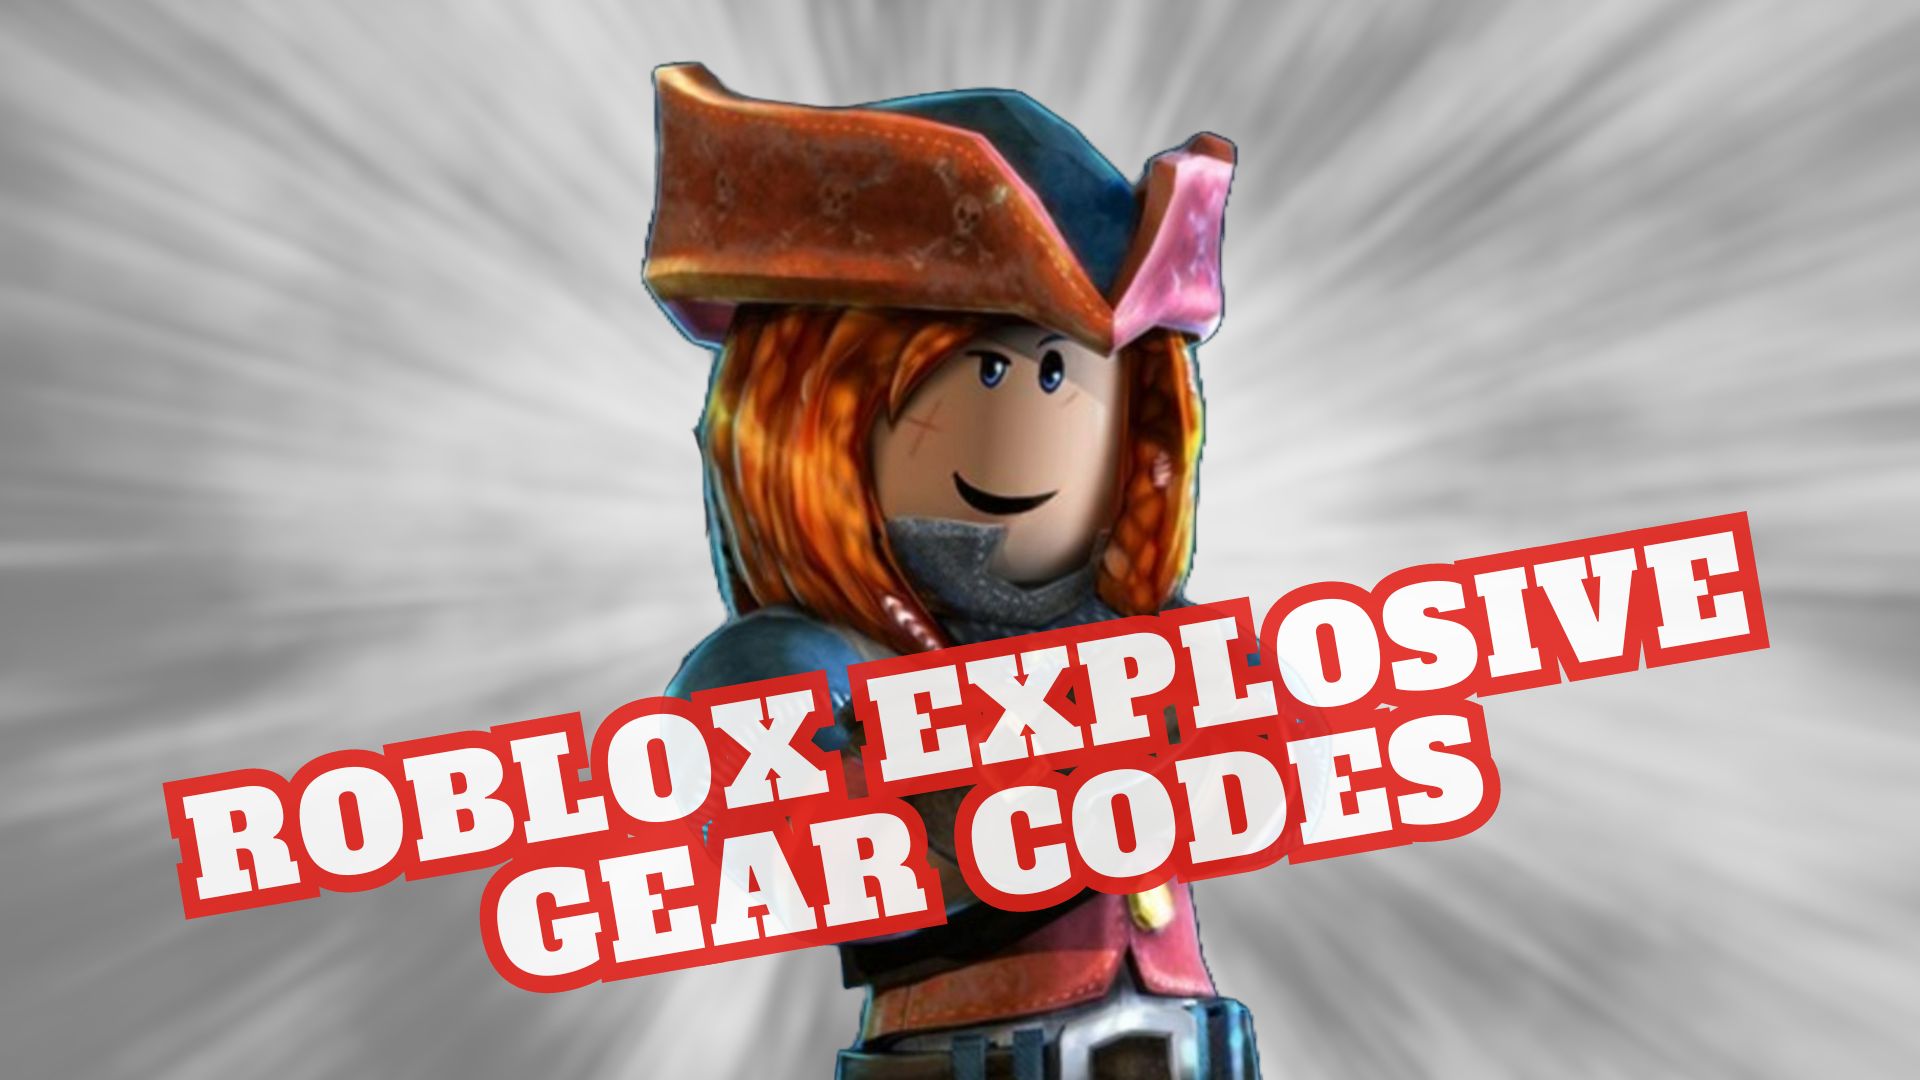 Fourth of July- Roblox ID - Roblox music codes